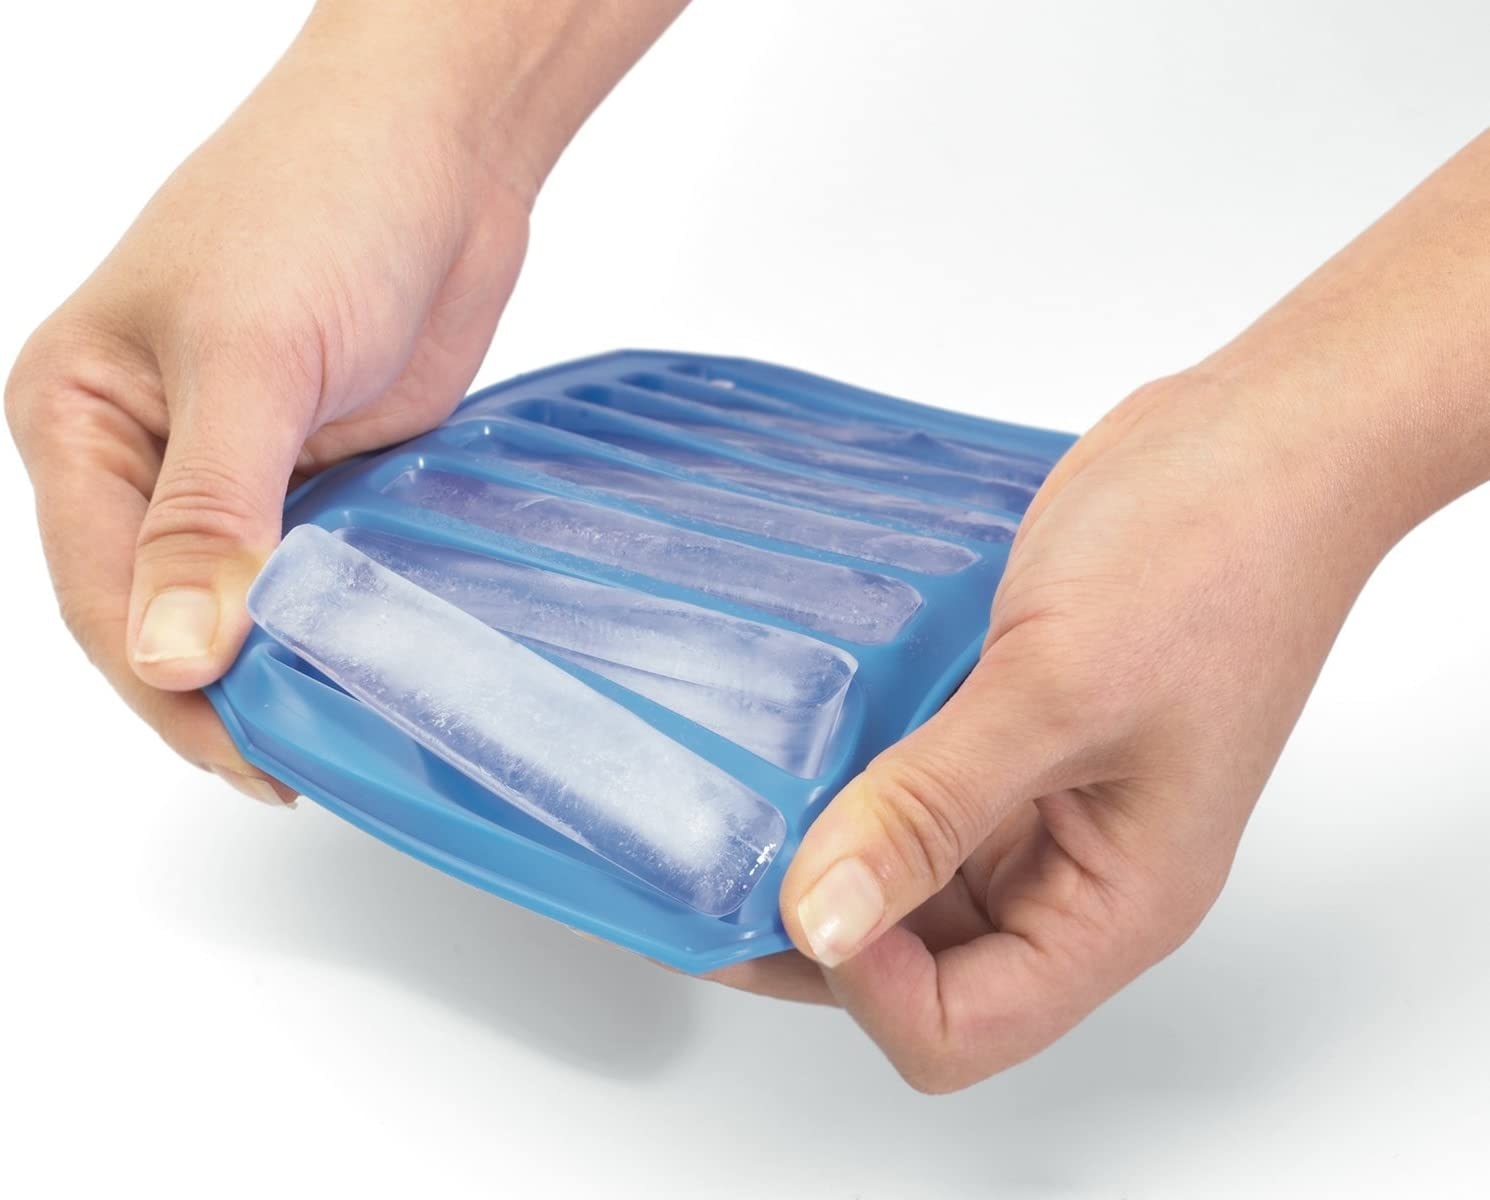 A person removing an ice cube from its tray